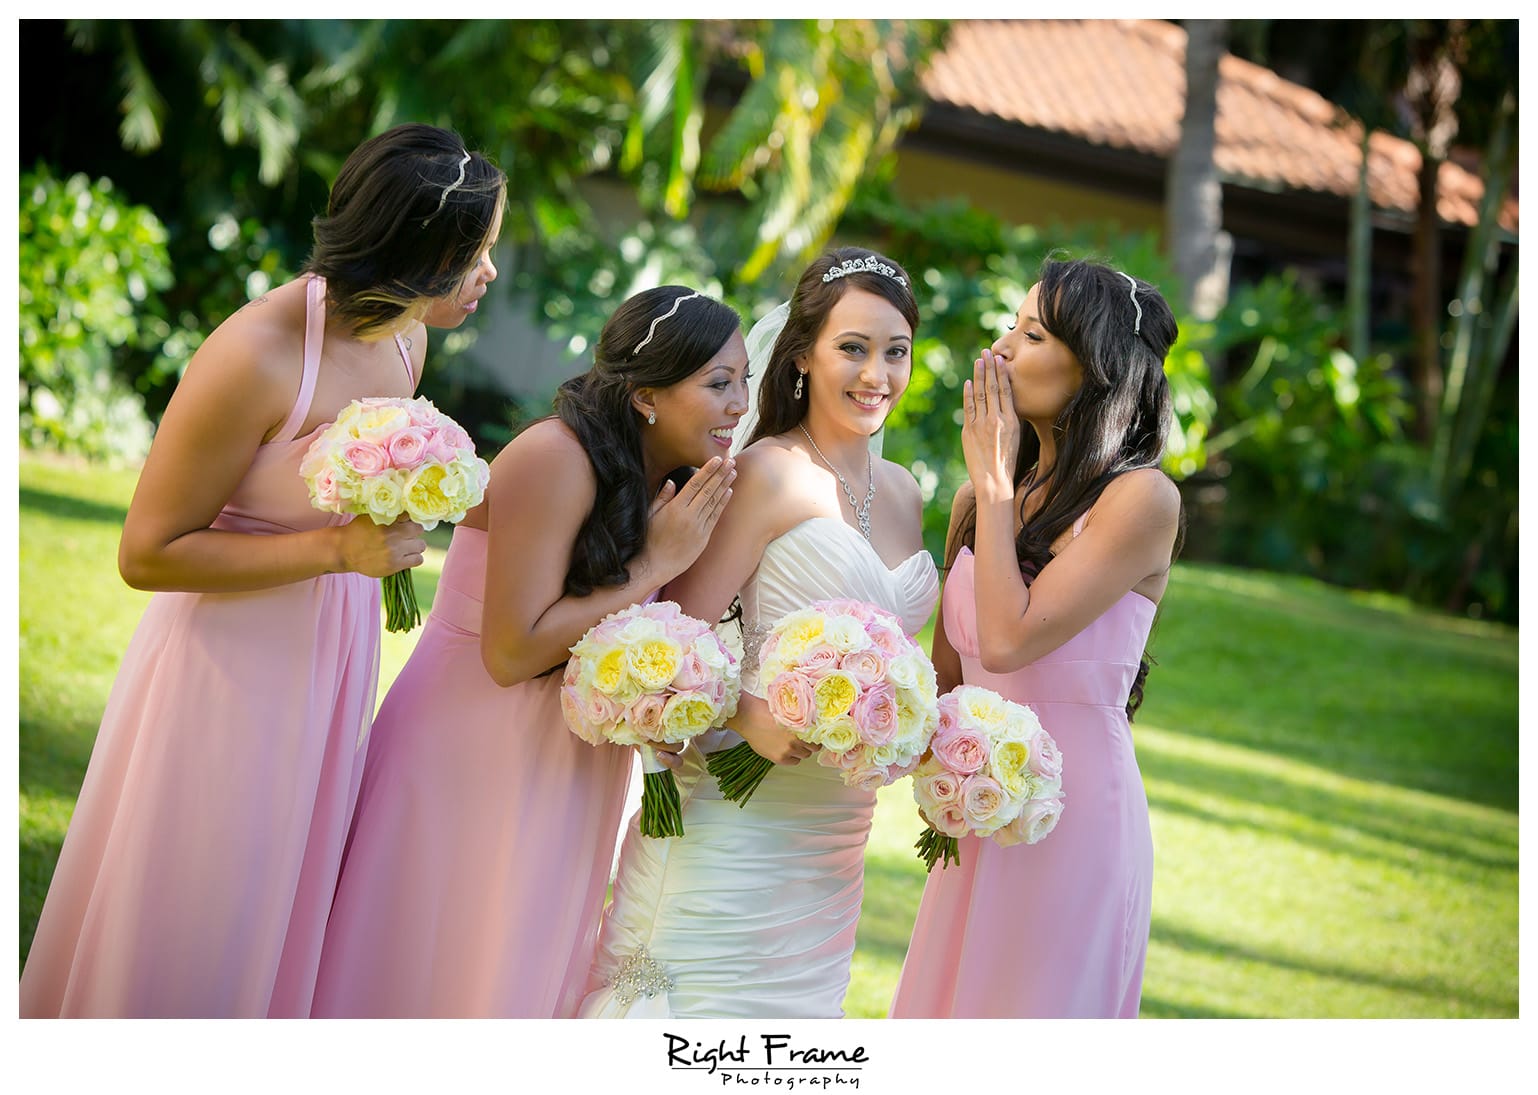 Ocean Crystal Chapel Wedding | Rika by RIGHT FRAME PHOTOGRAPHY